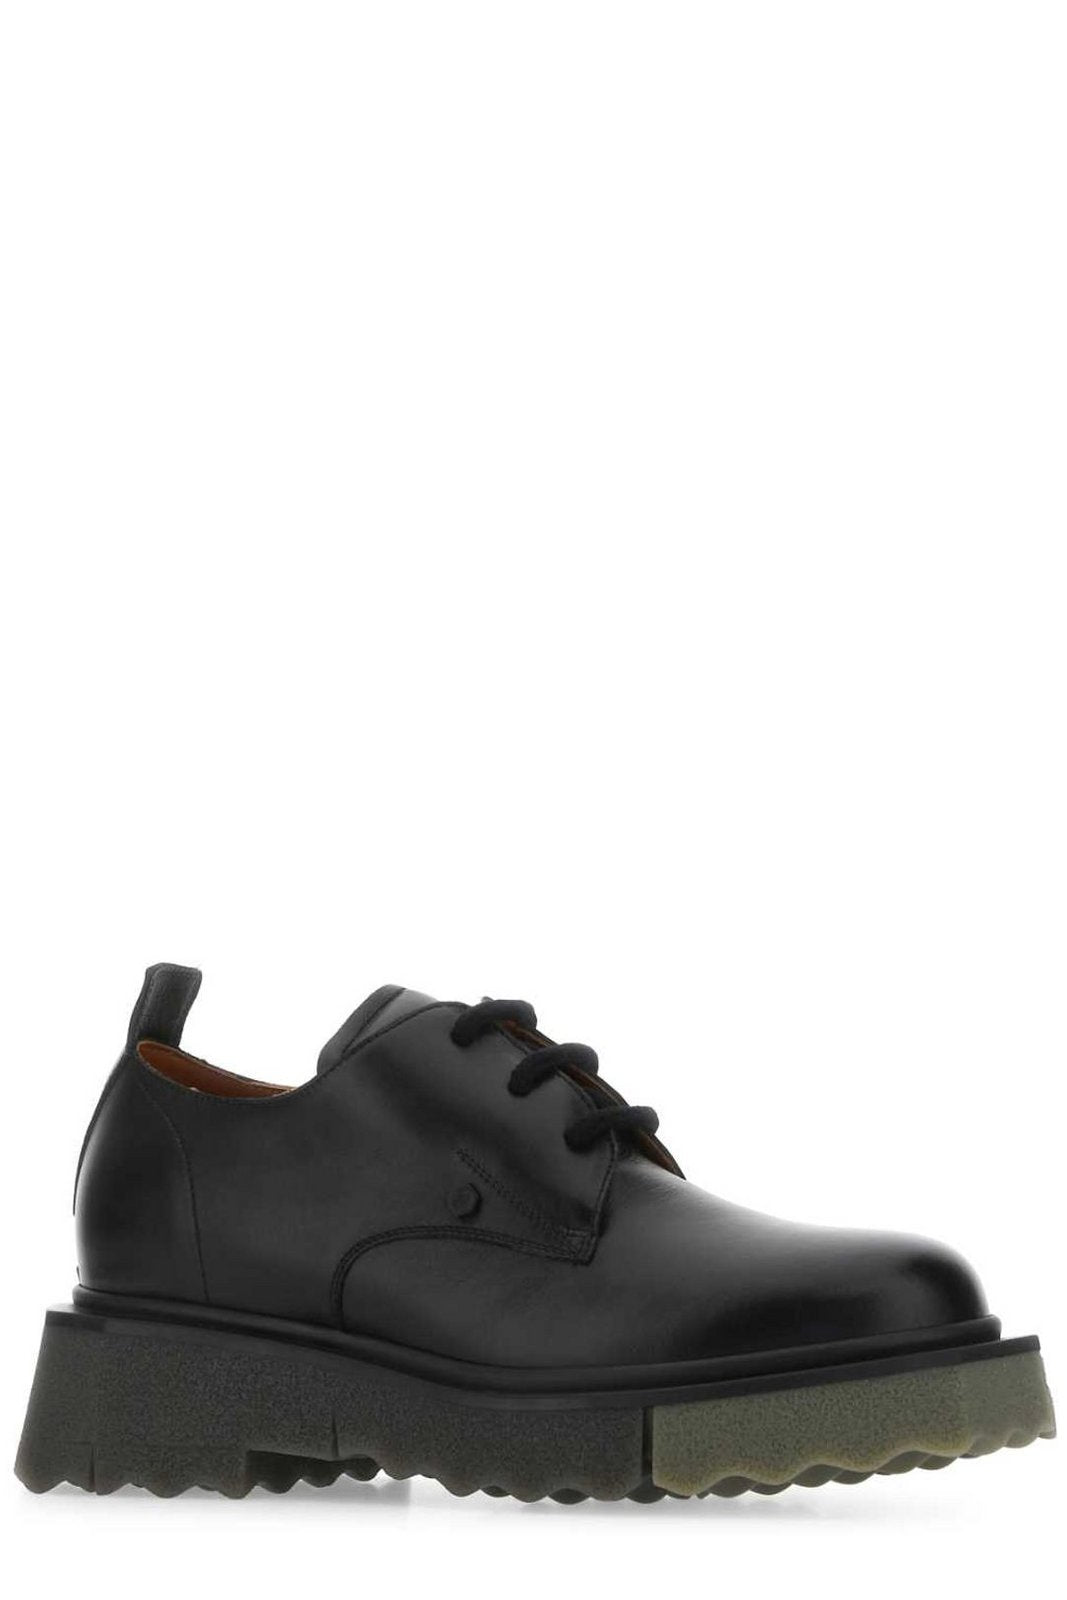 Off-White Round Toe Lace-Up Shoes